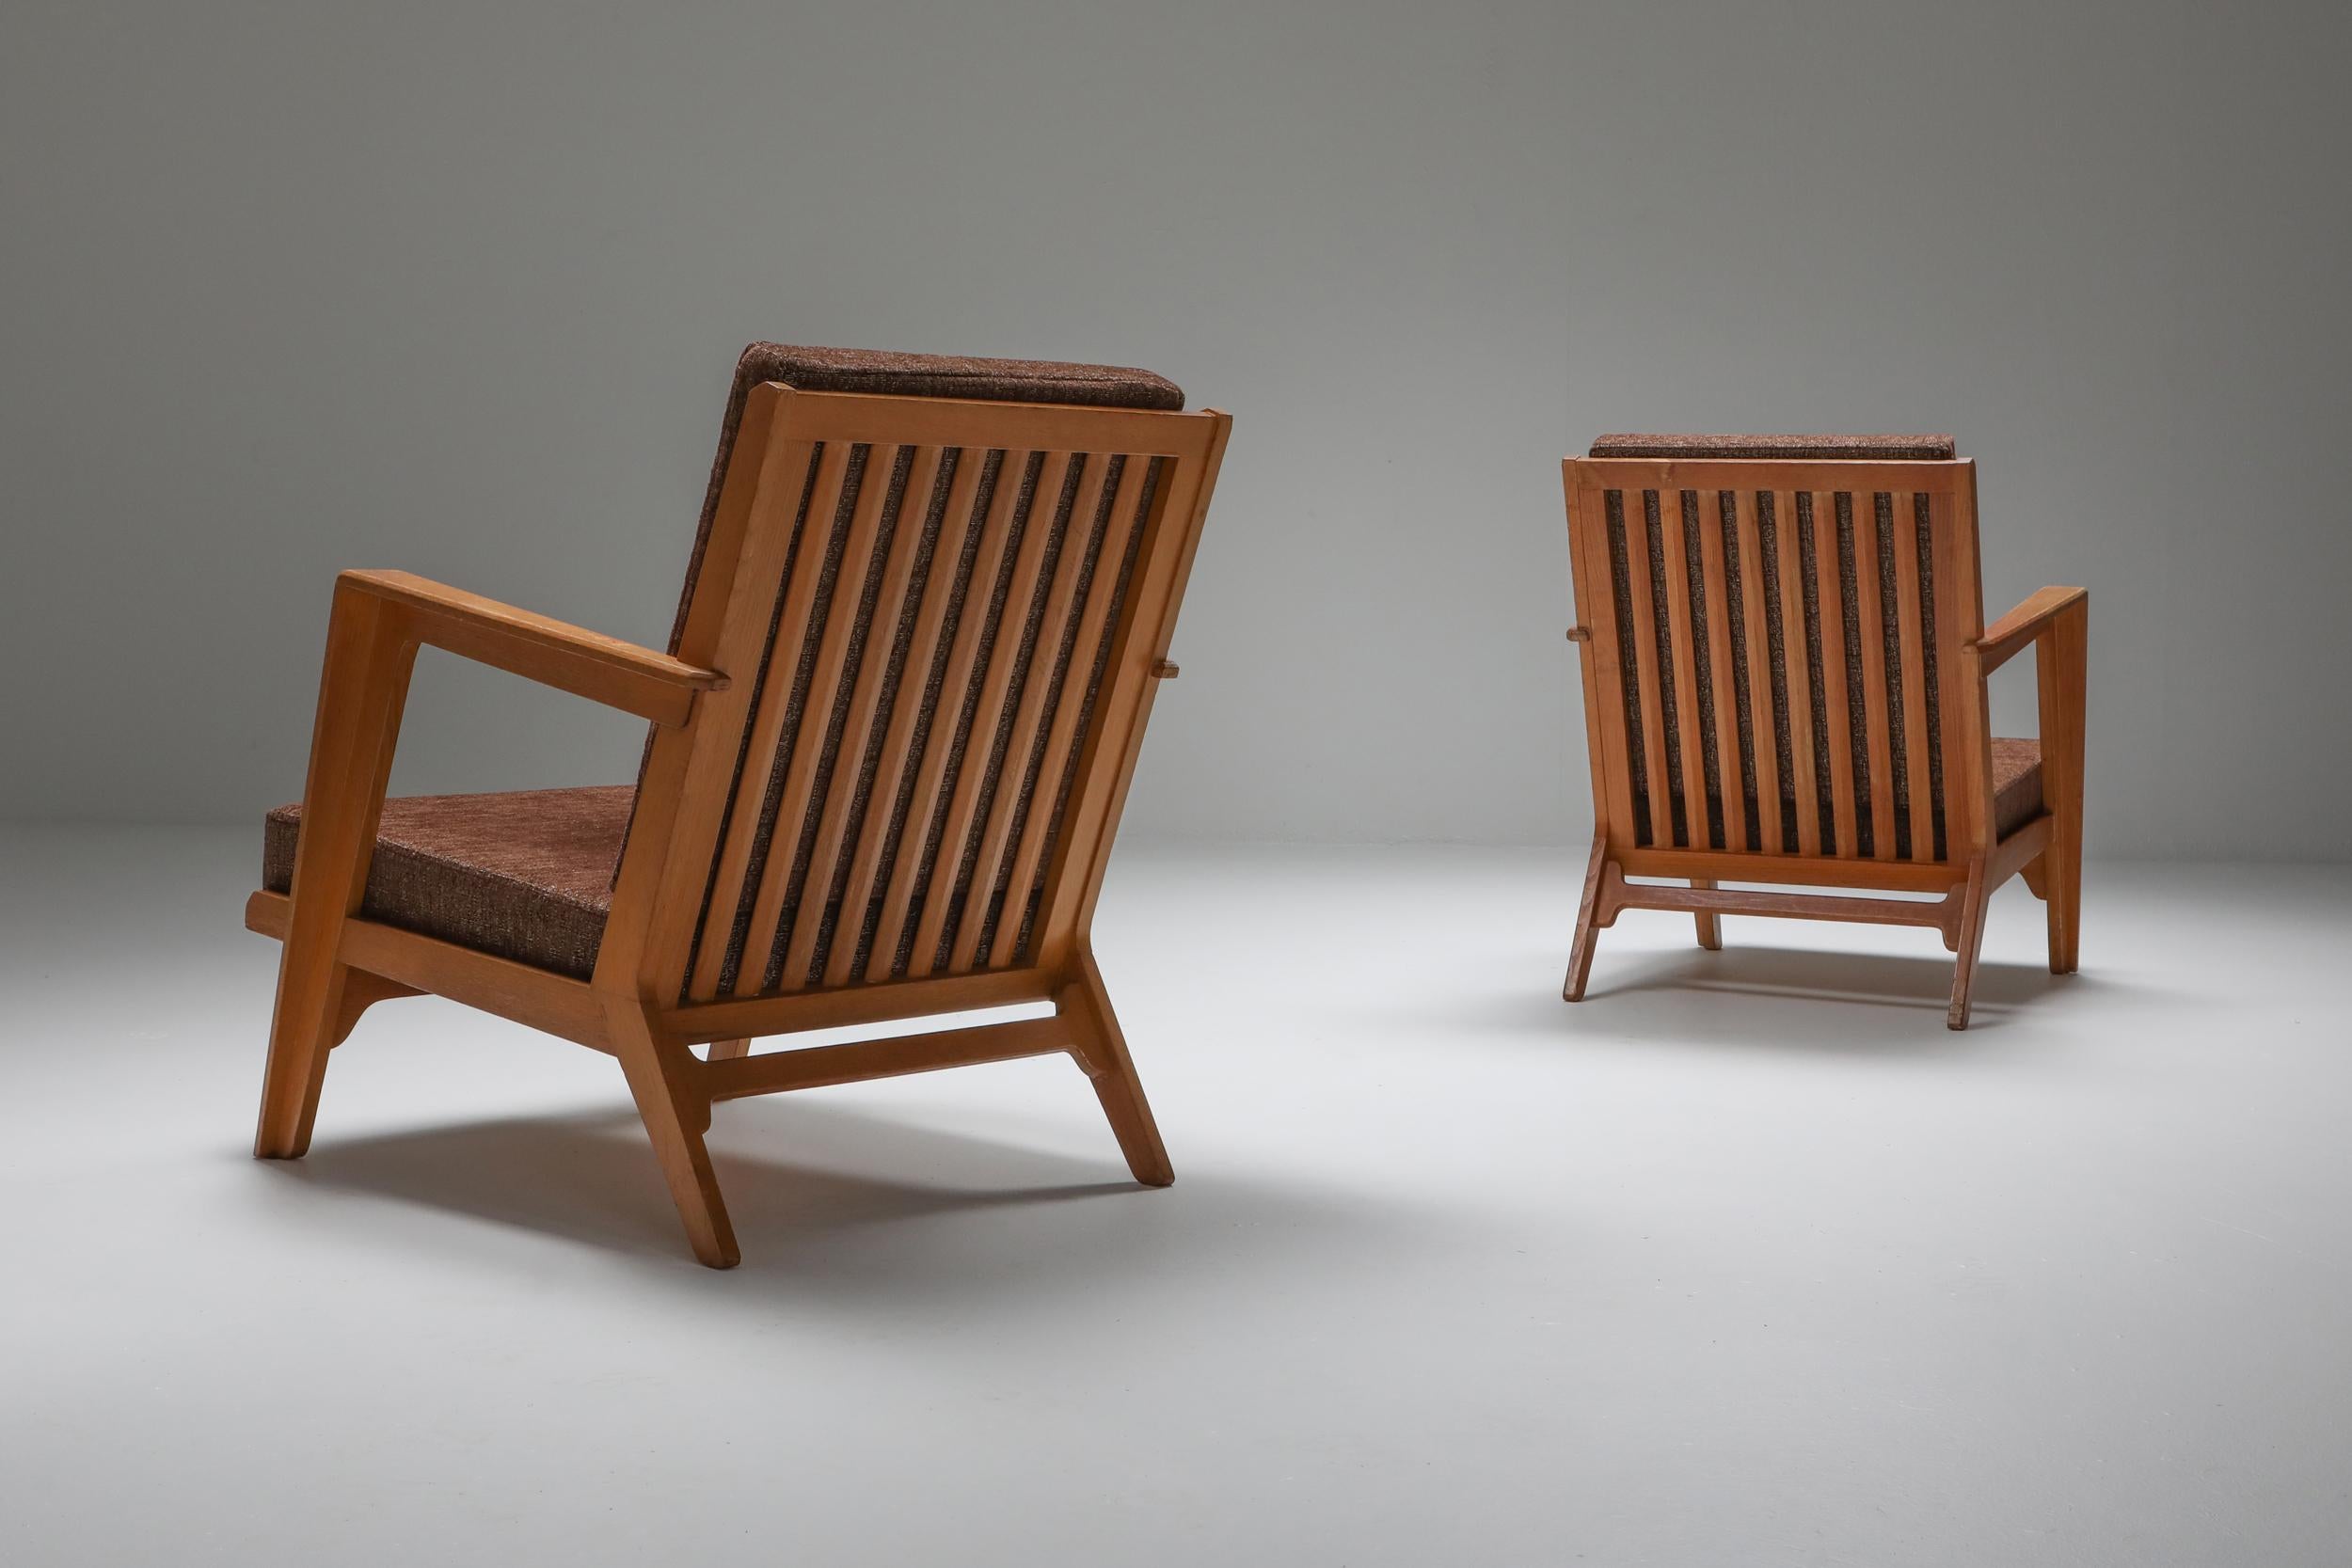 Mid-Century Modern, Elmar Berkovich, lounge chair, 1950, the Netherlands.

This is a super rare pair of chairs, original upholstery, teak frame with stunning details
Elmar Berkovich has quite a few pieces in Museum collections, like Stedelijk and